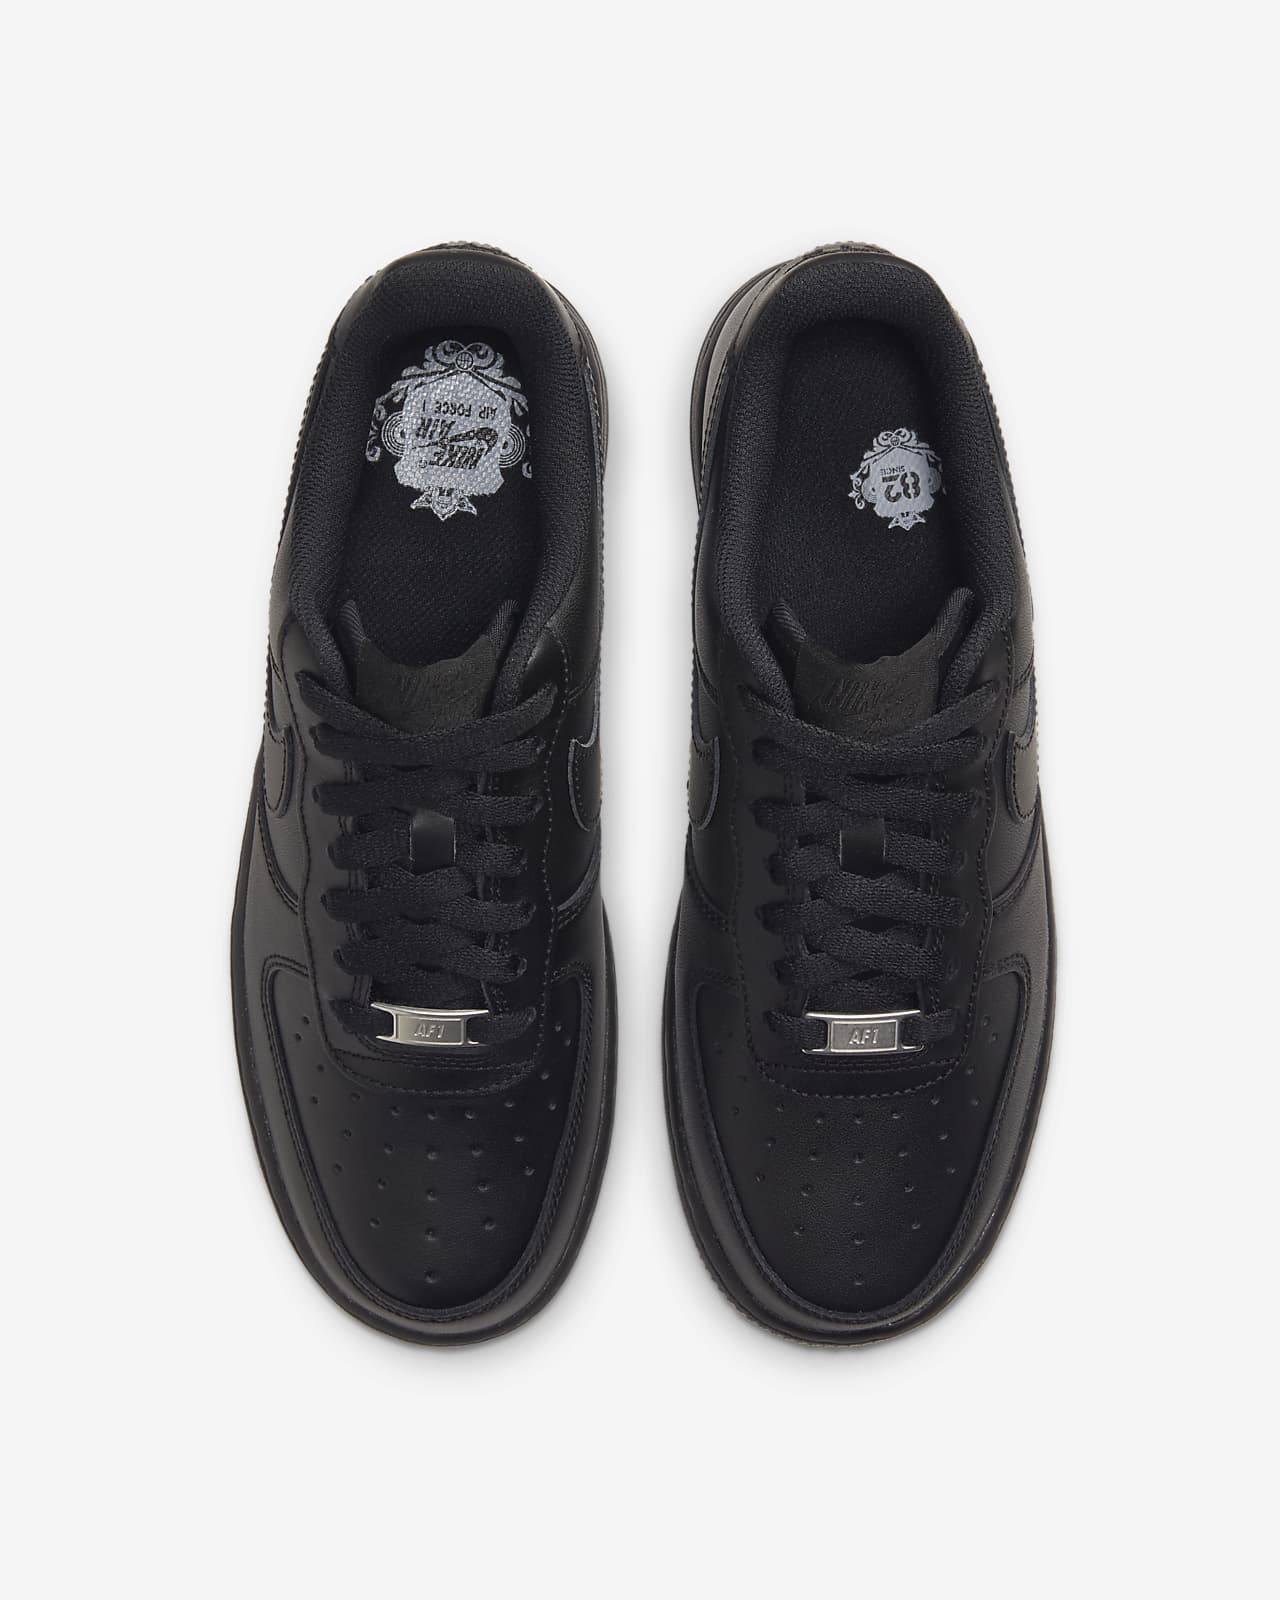 air force 1 nere donna